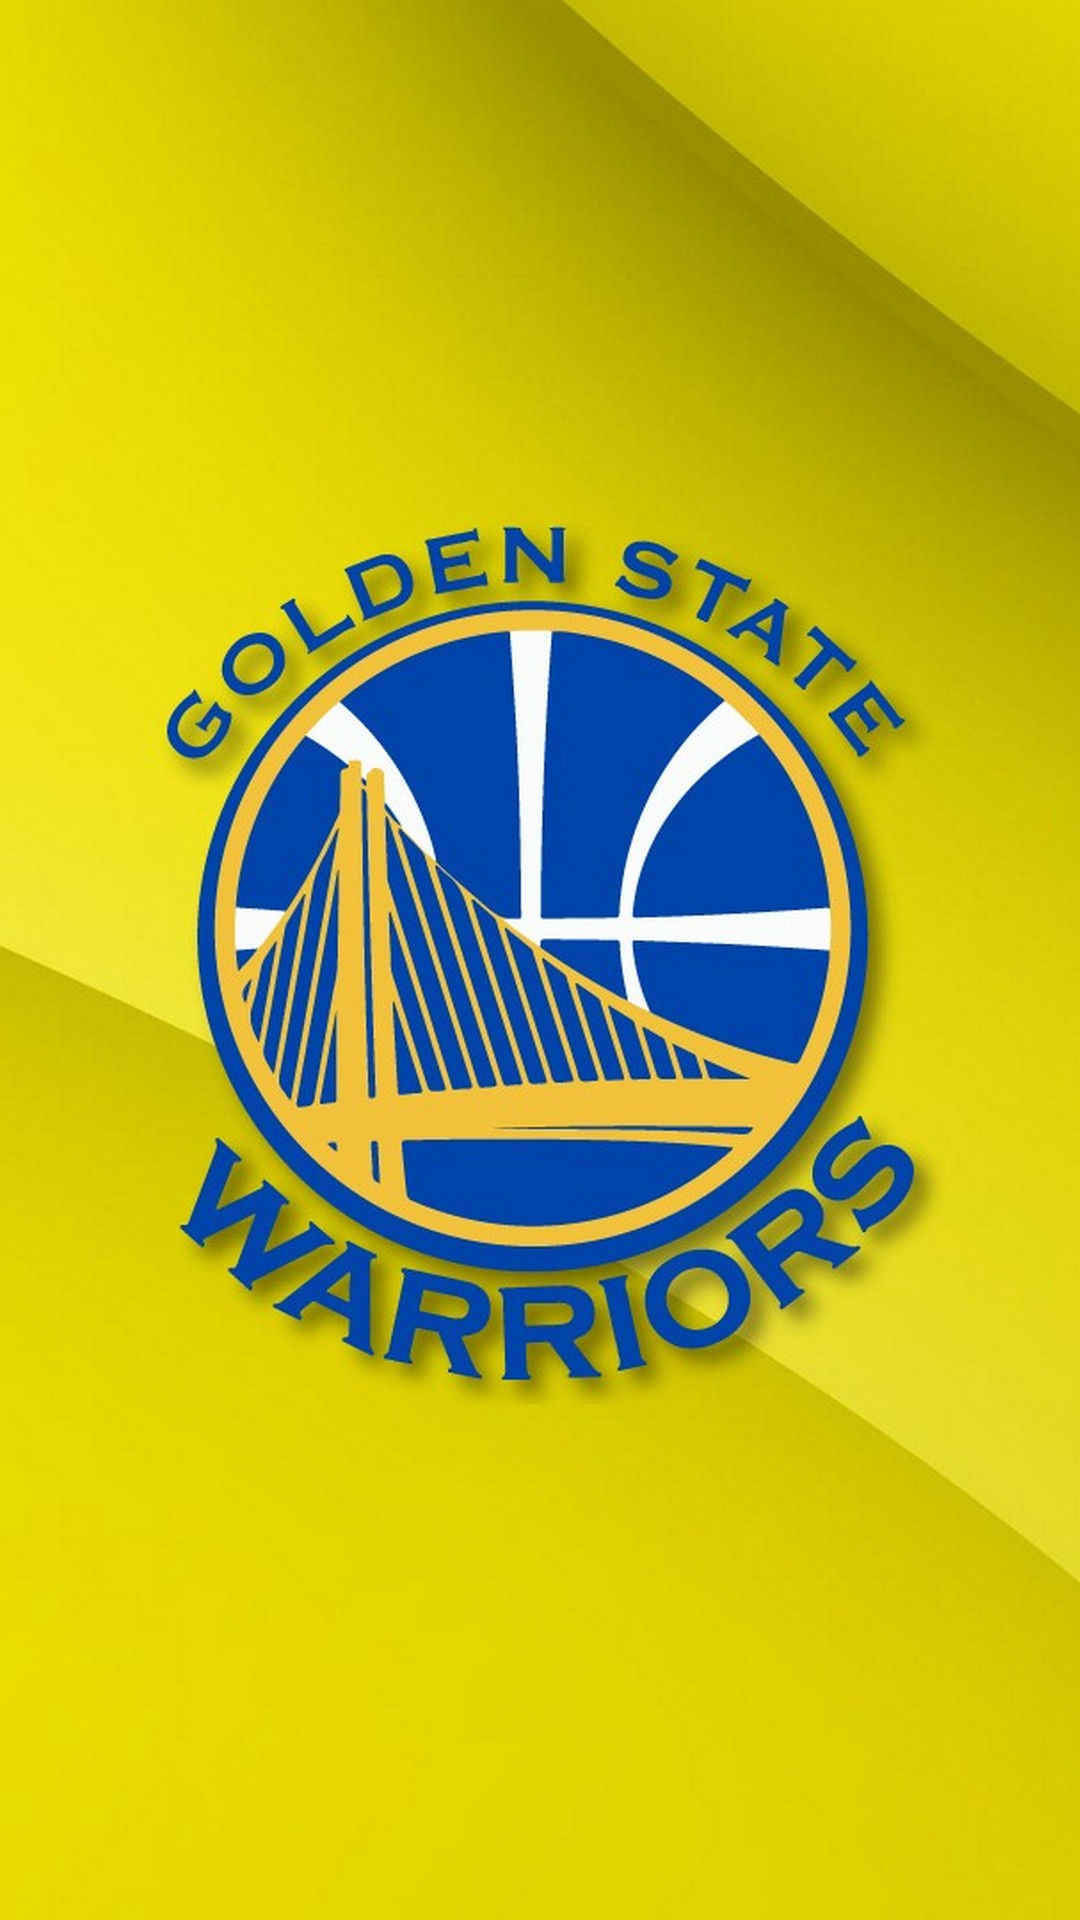 Golden State iPhone Wallpapers with image dimensions 1080x1920 pixel. You can make this wallpaper for your Desktop Computer Backgrounds, Windows or Mac Screensavers, iPhone Lock screen, Tablet or Android and another Mobile Phone device